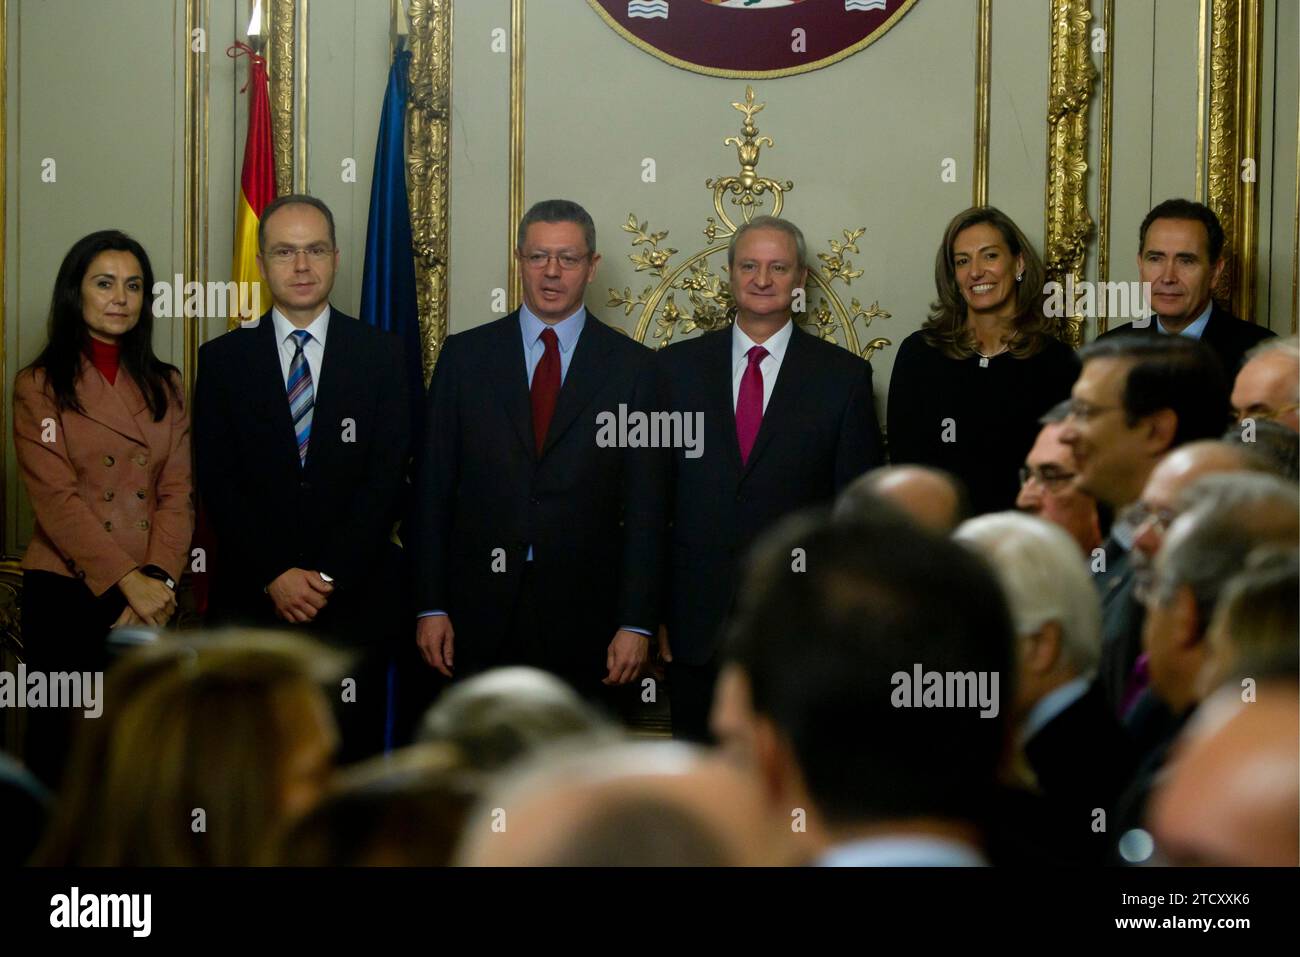 Madrid, 01/03/2012. Inauguration of senior officials of the Ministry of Justice. From left to right, Ms. Mireya Corredor Lanas, Technical General Secretary, Mr. Juan Bravo Rivera, Undersecretary of Justice, Mr. Alberto Ruiz Gallardón, Minister of Justice, Mr. Fernando Román García, Secretary of State for Justice, Ms. Cristina Coto del Valle, Director of the Minister's Office and Mr. Joaquín José Rodríguez Hernández, General Director of Registries and Notaries. Photo: Isabel Permuy. ARCHDC. Credit: Album / Archivo ABC / Isabel B. Permuy Stock Photo